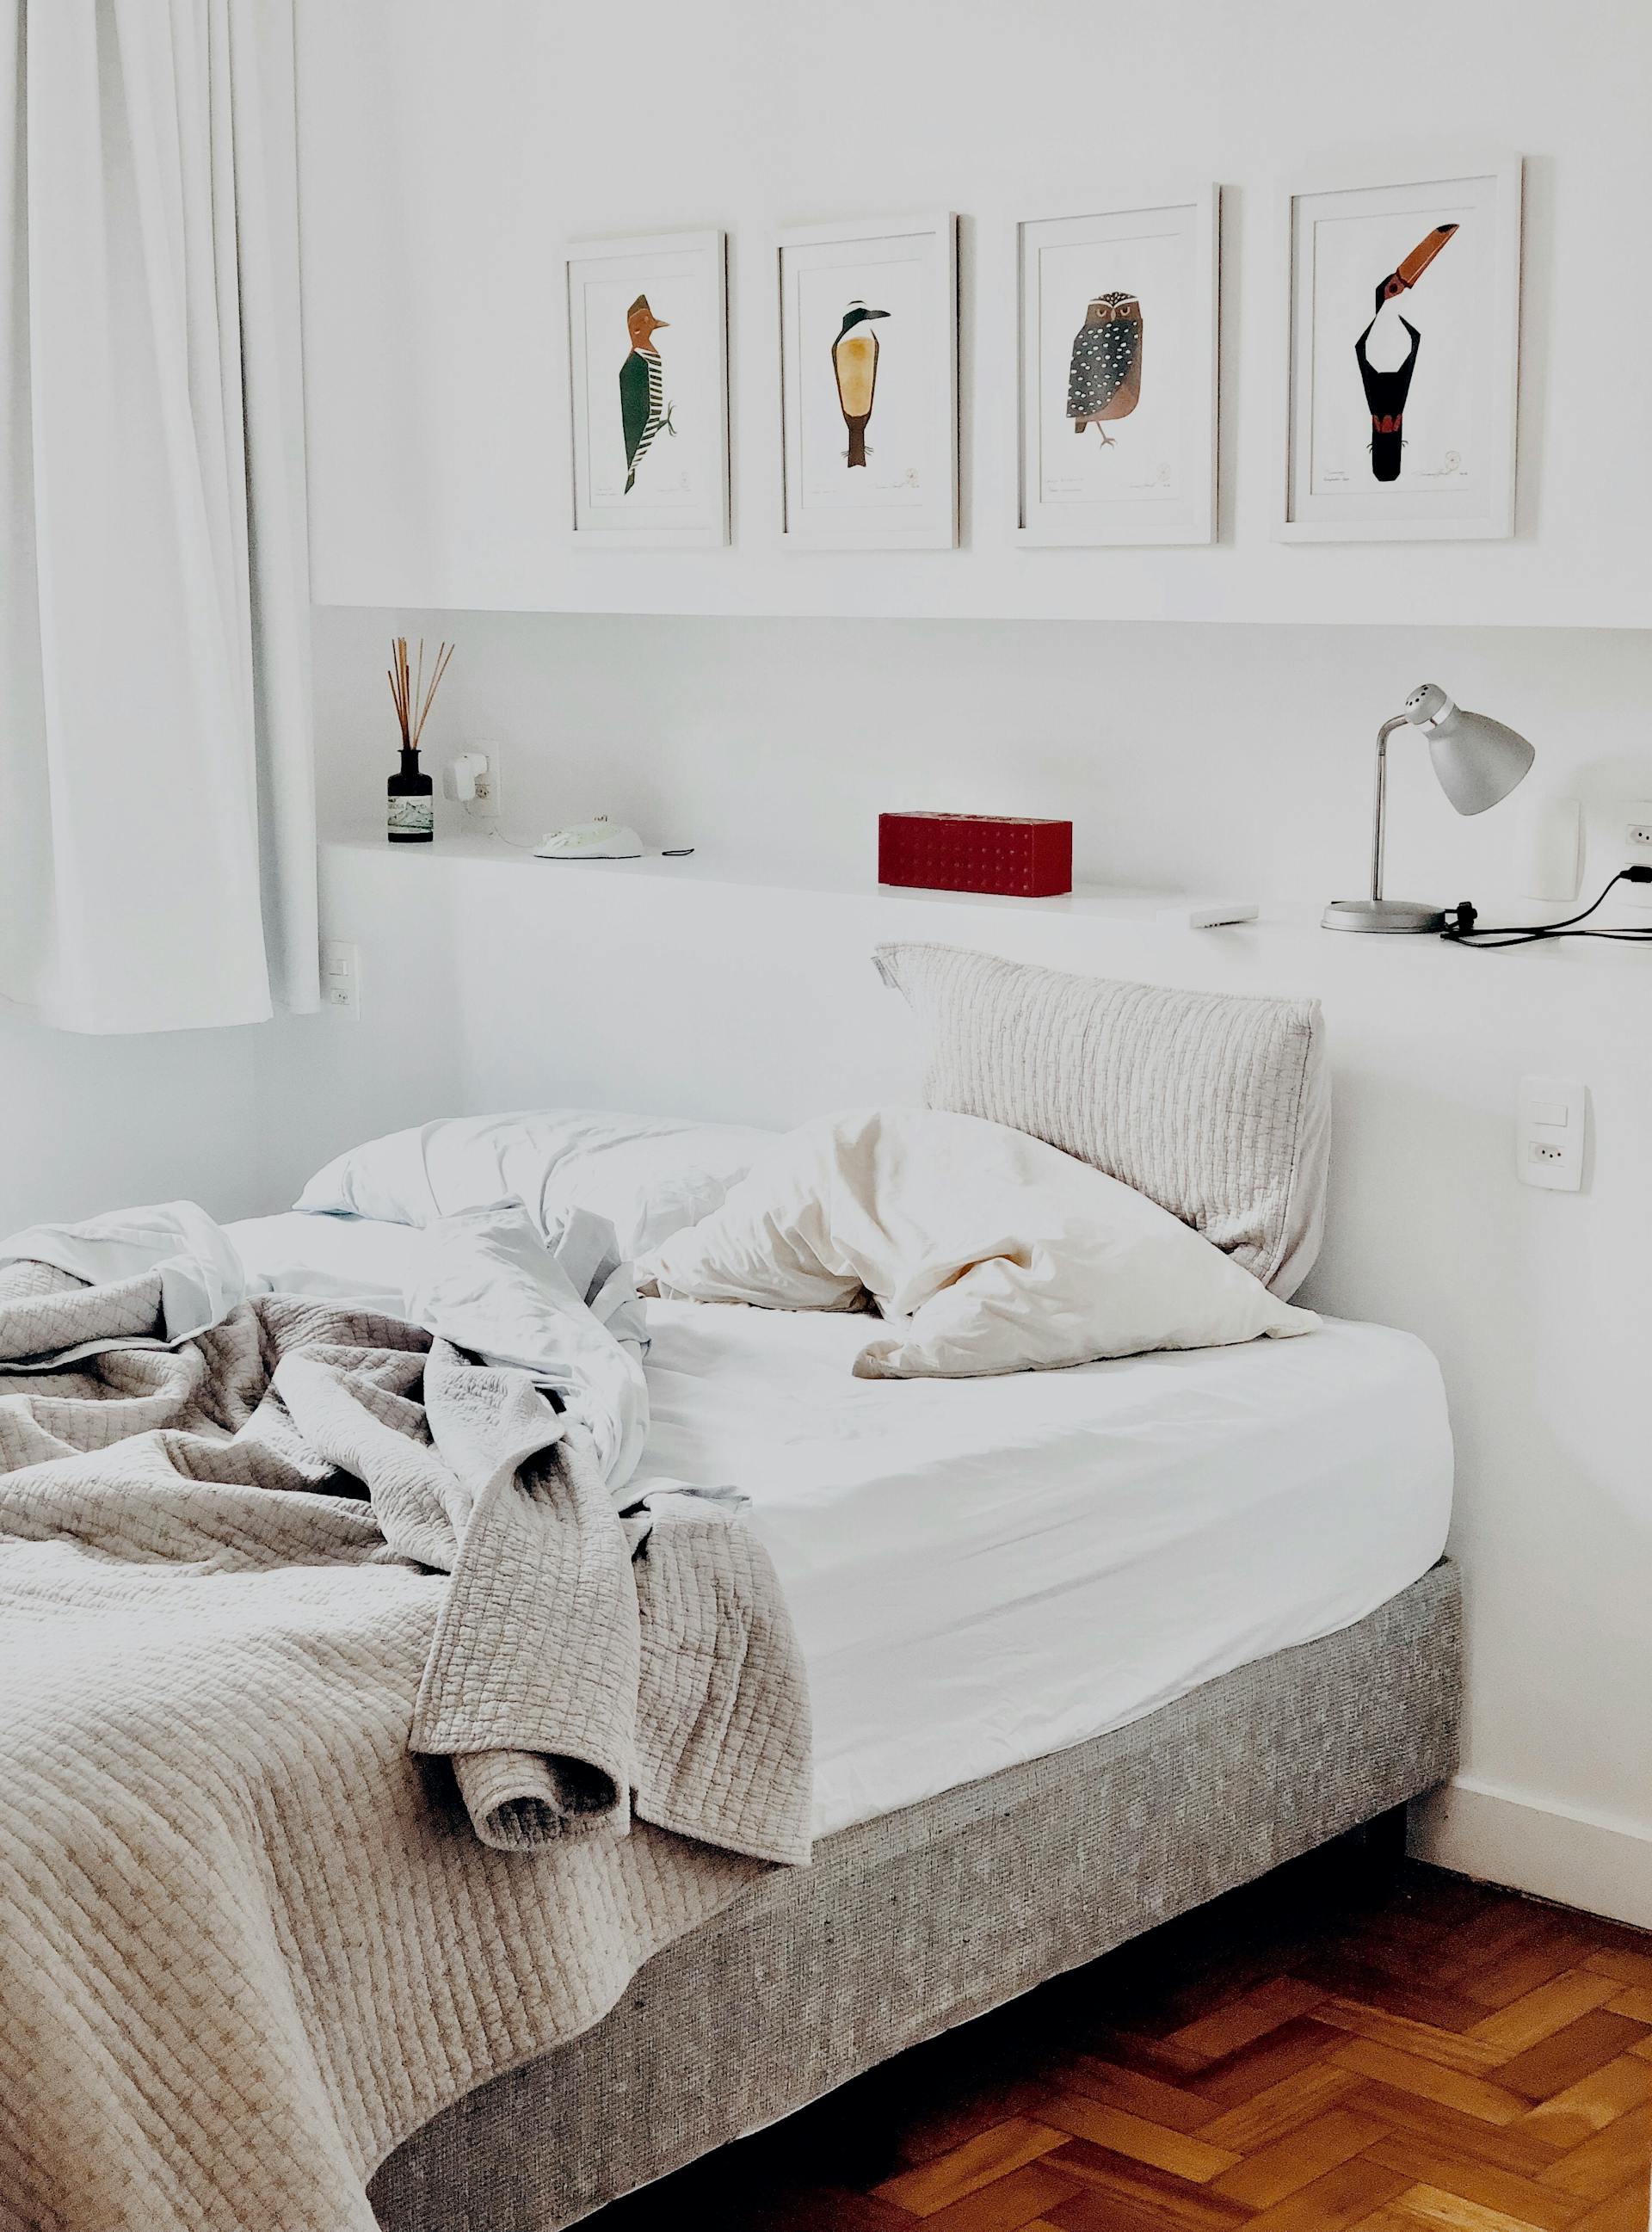 An unmade bed | Source: Pexels